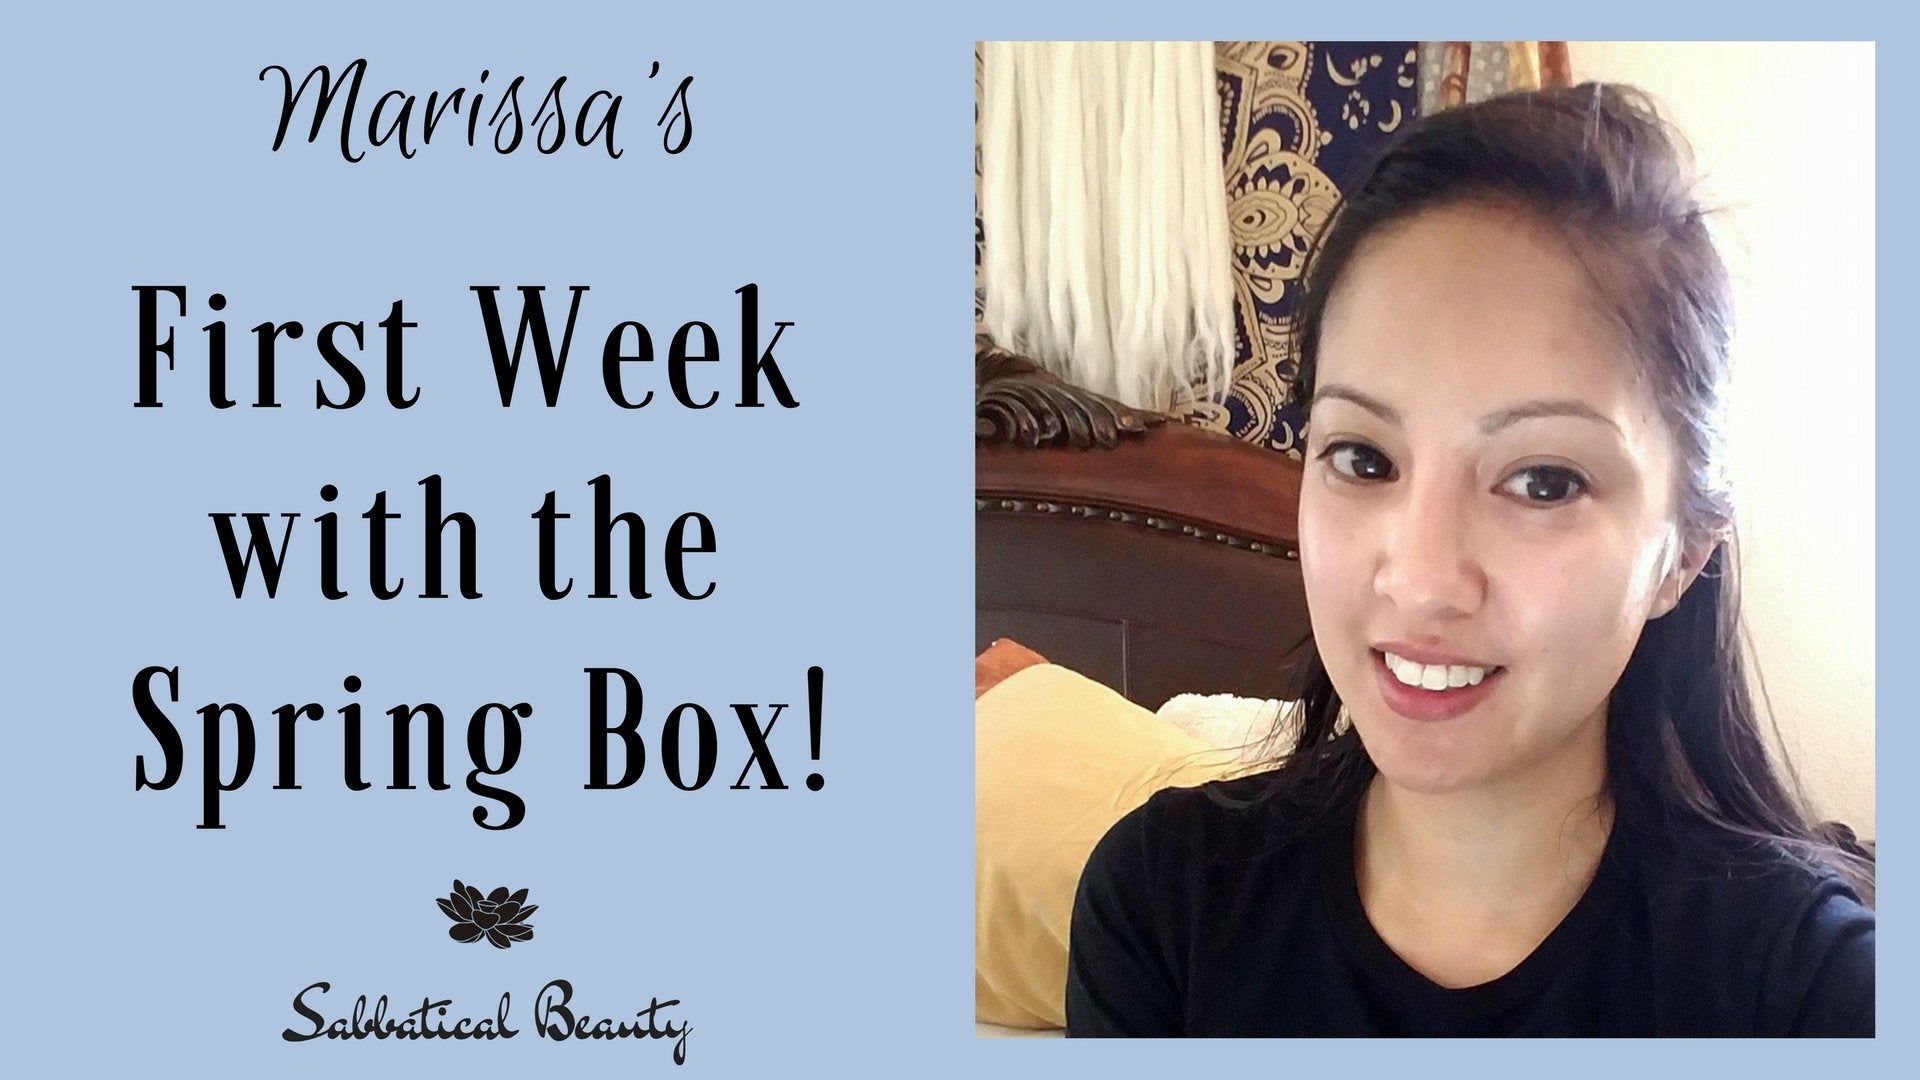 One Week with the Spring Box - Marissa's Update! - Sabbatical Beauty